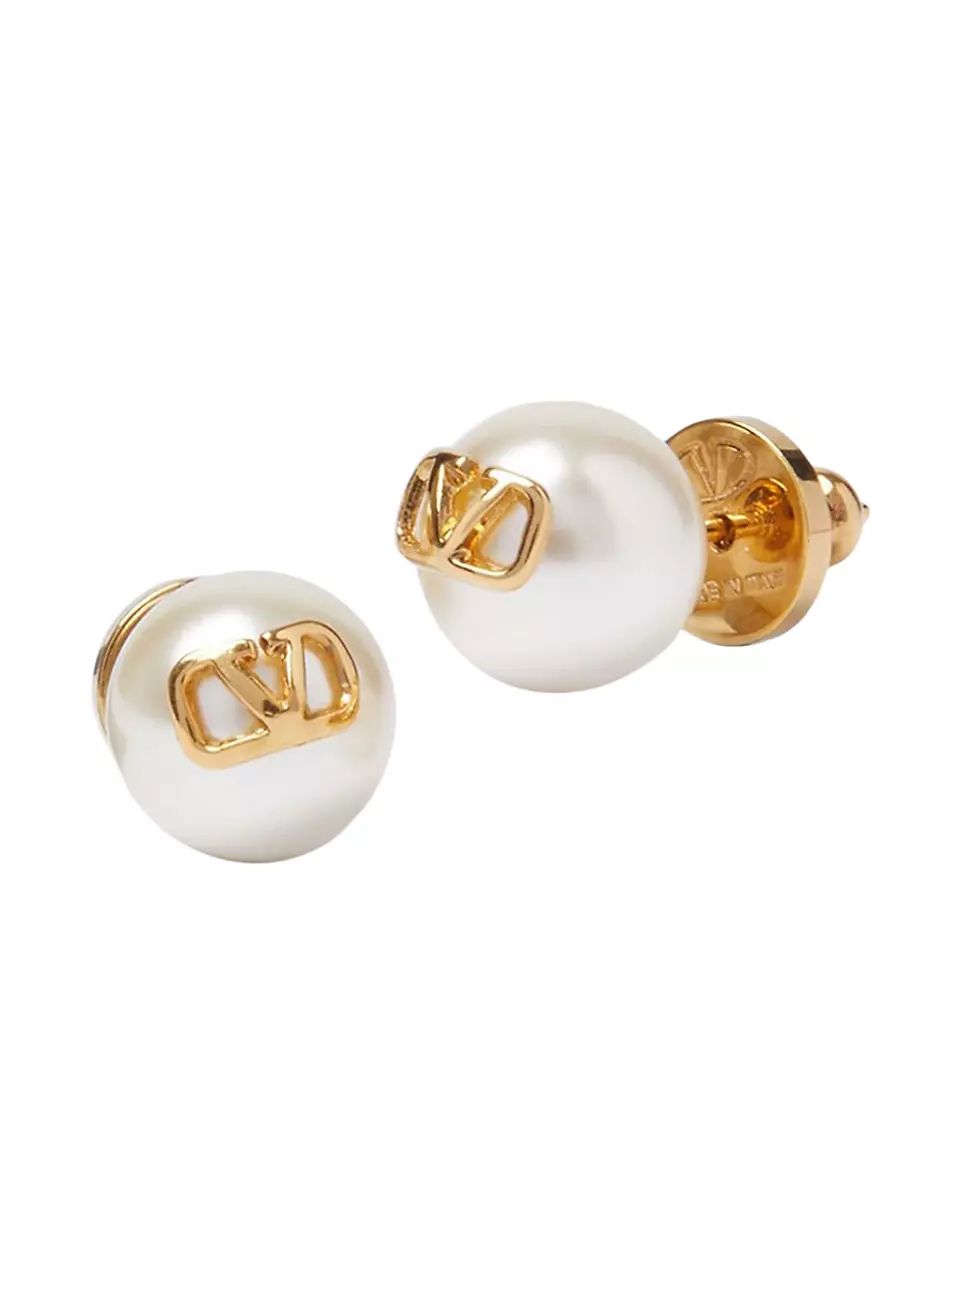 VLogo Signature Earrings With Pearls | Saks Fifth Avenue